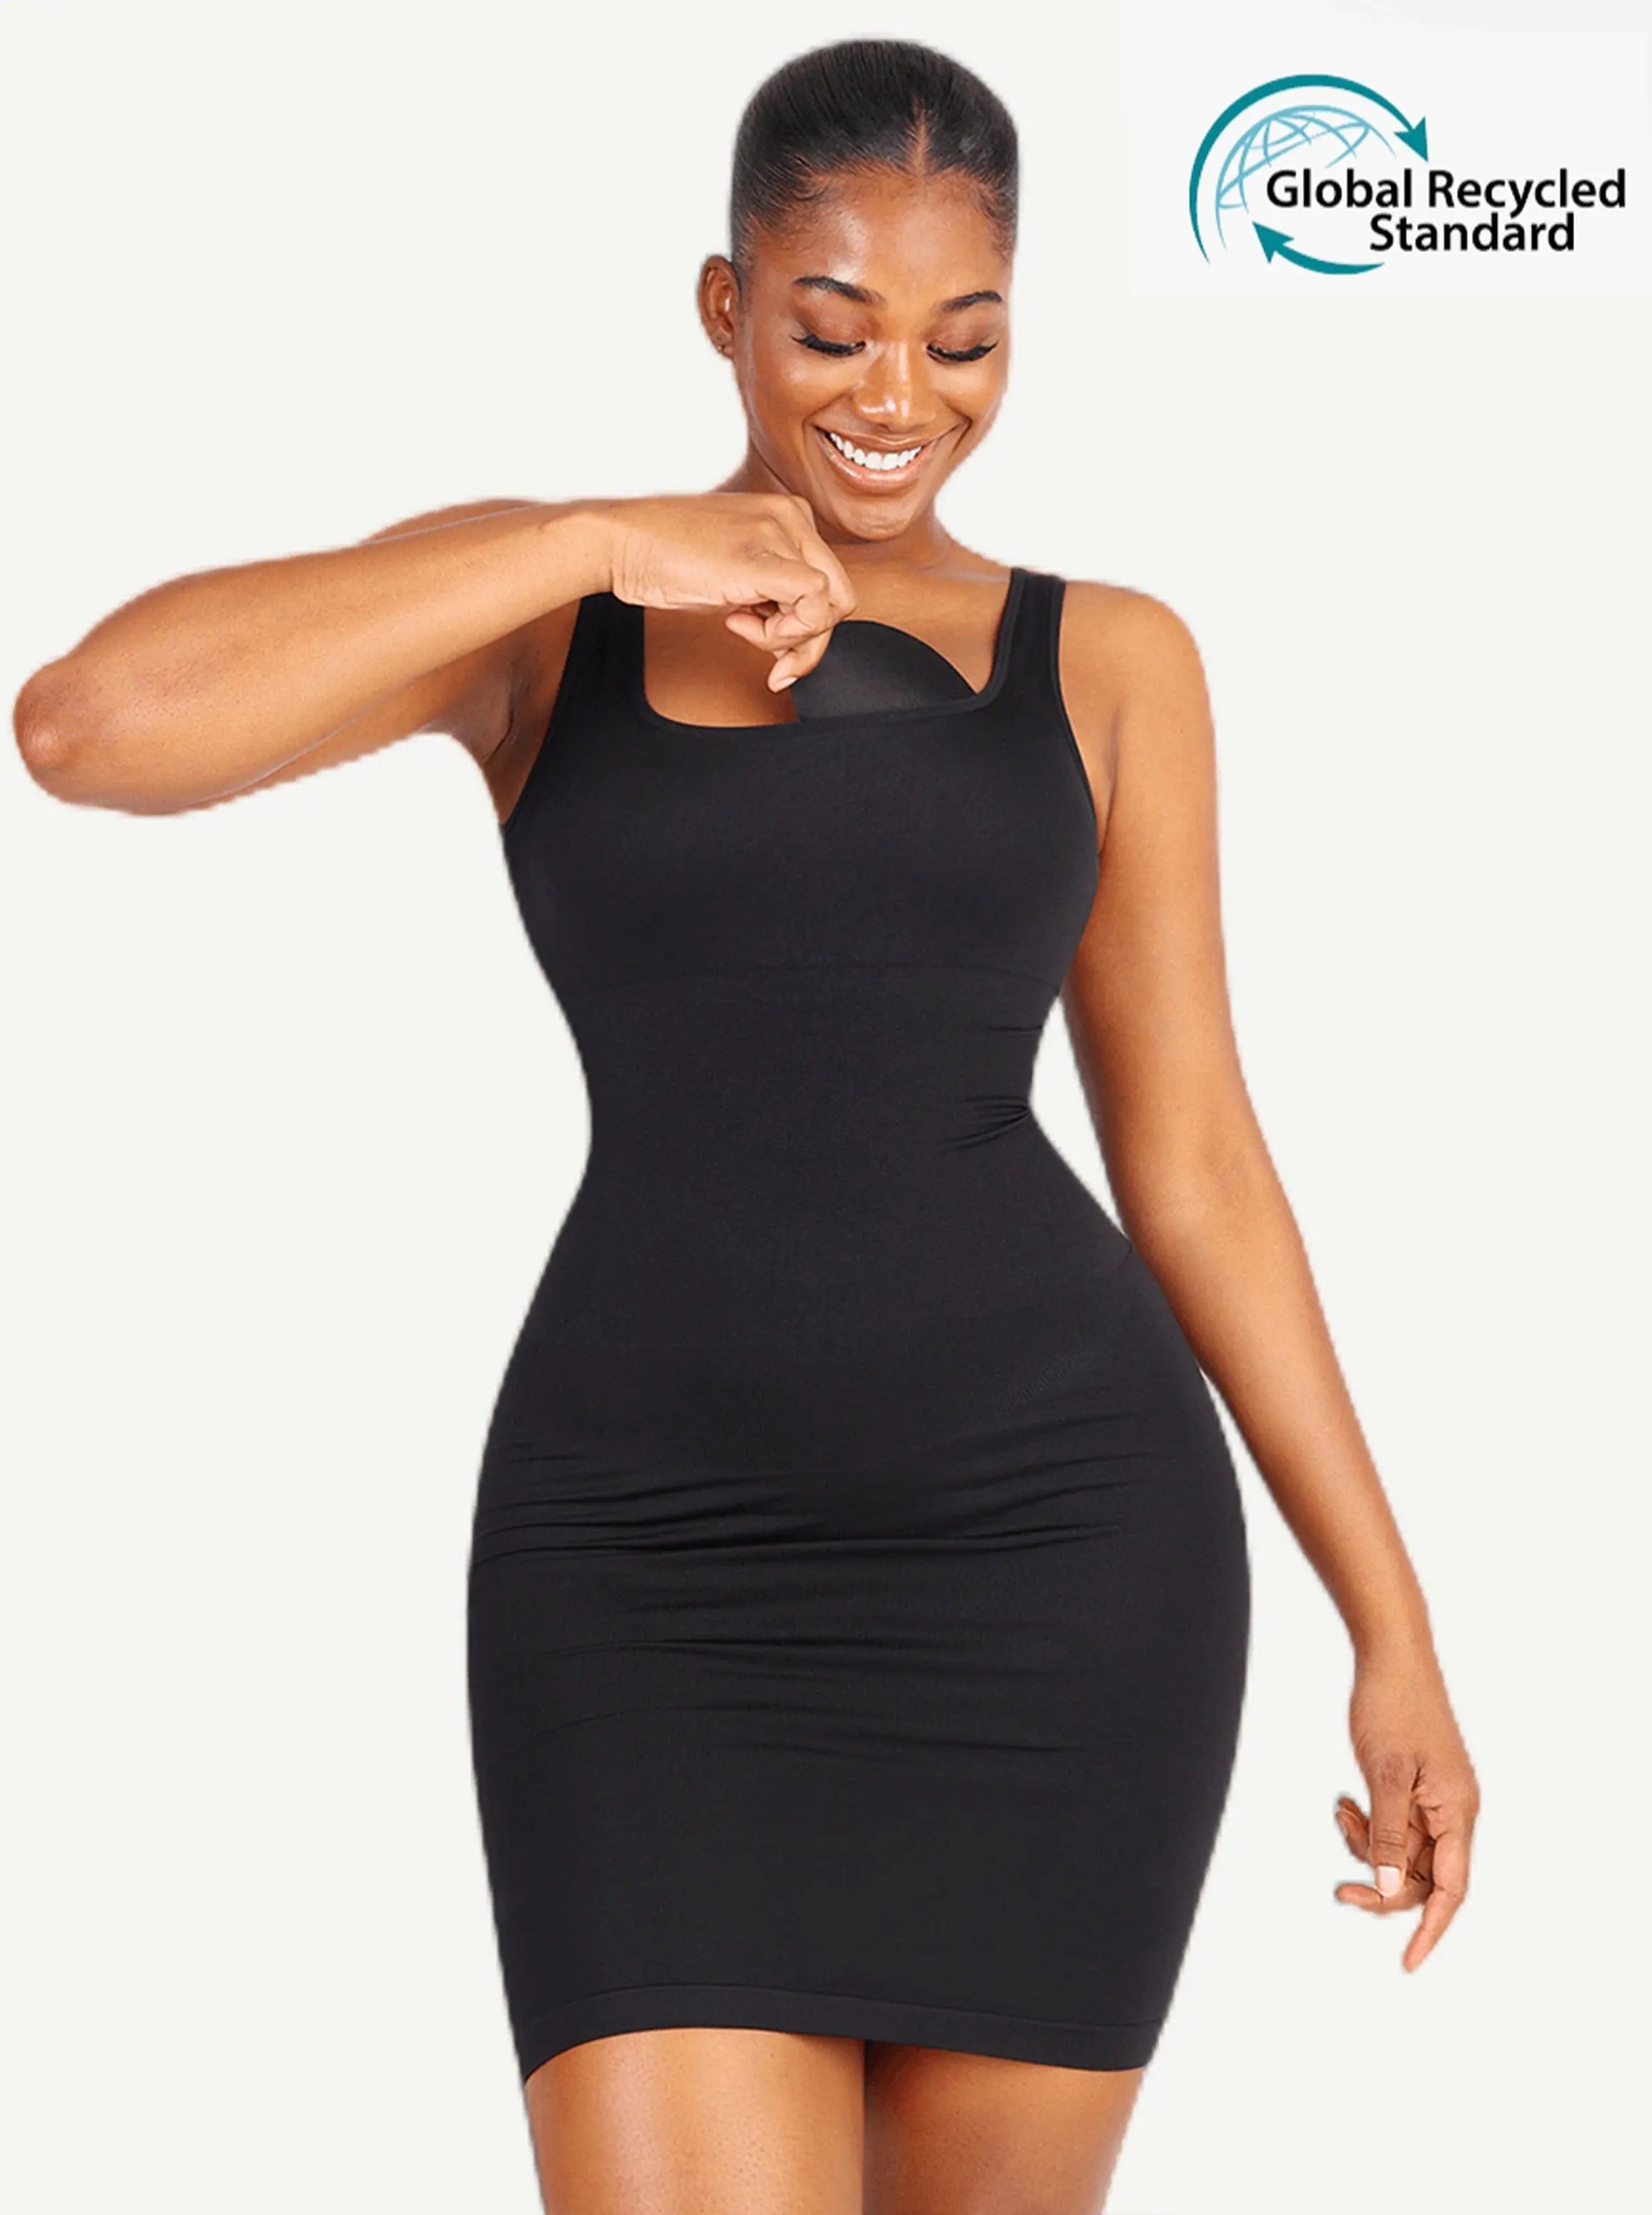 Wholesale Eco-friendly Square-neck Shaper Snatched Seamless Dress